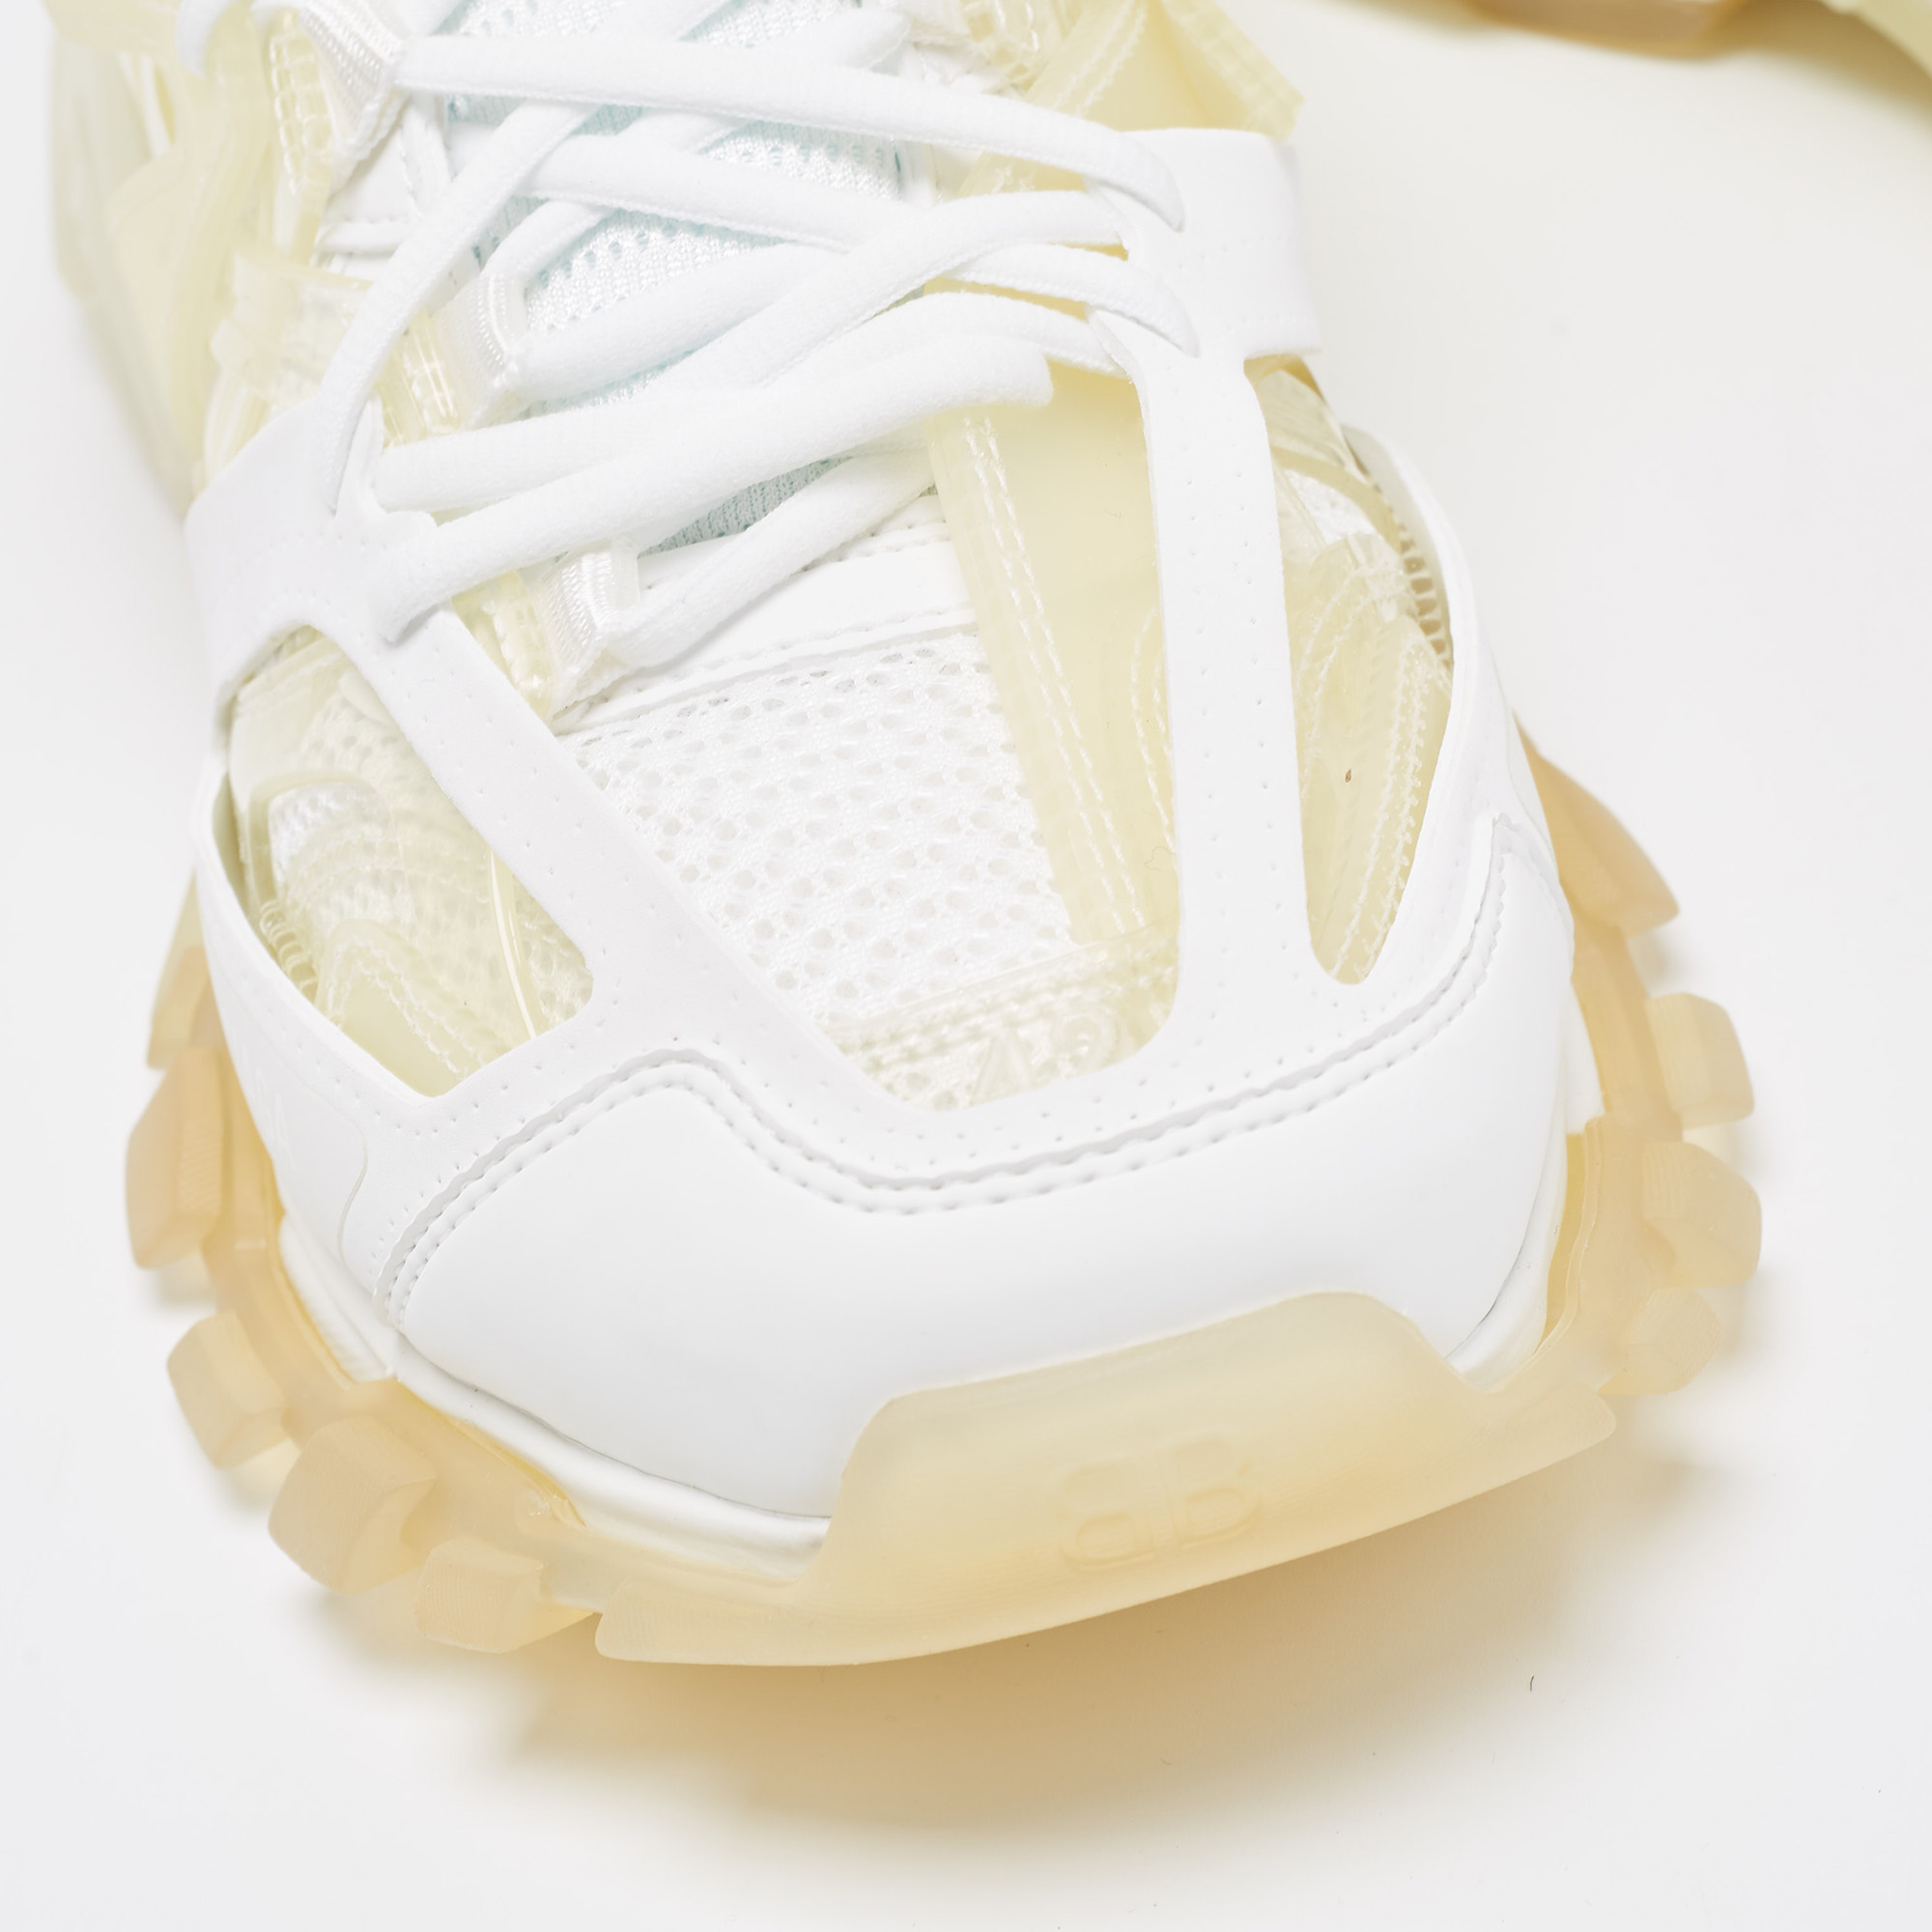 Balenciaga White Leather And PVC Track Clear Sole Sneakers Size 42